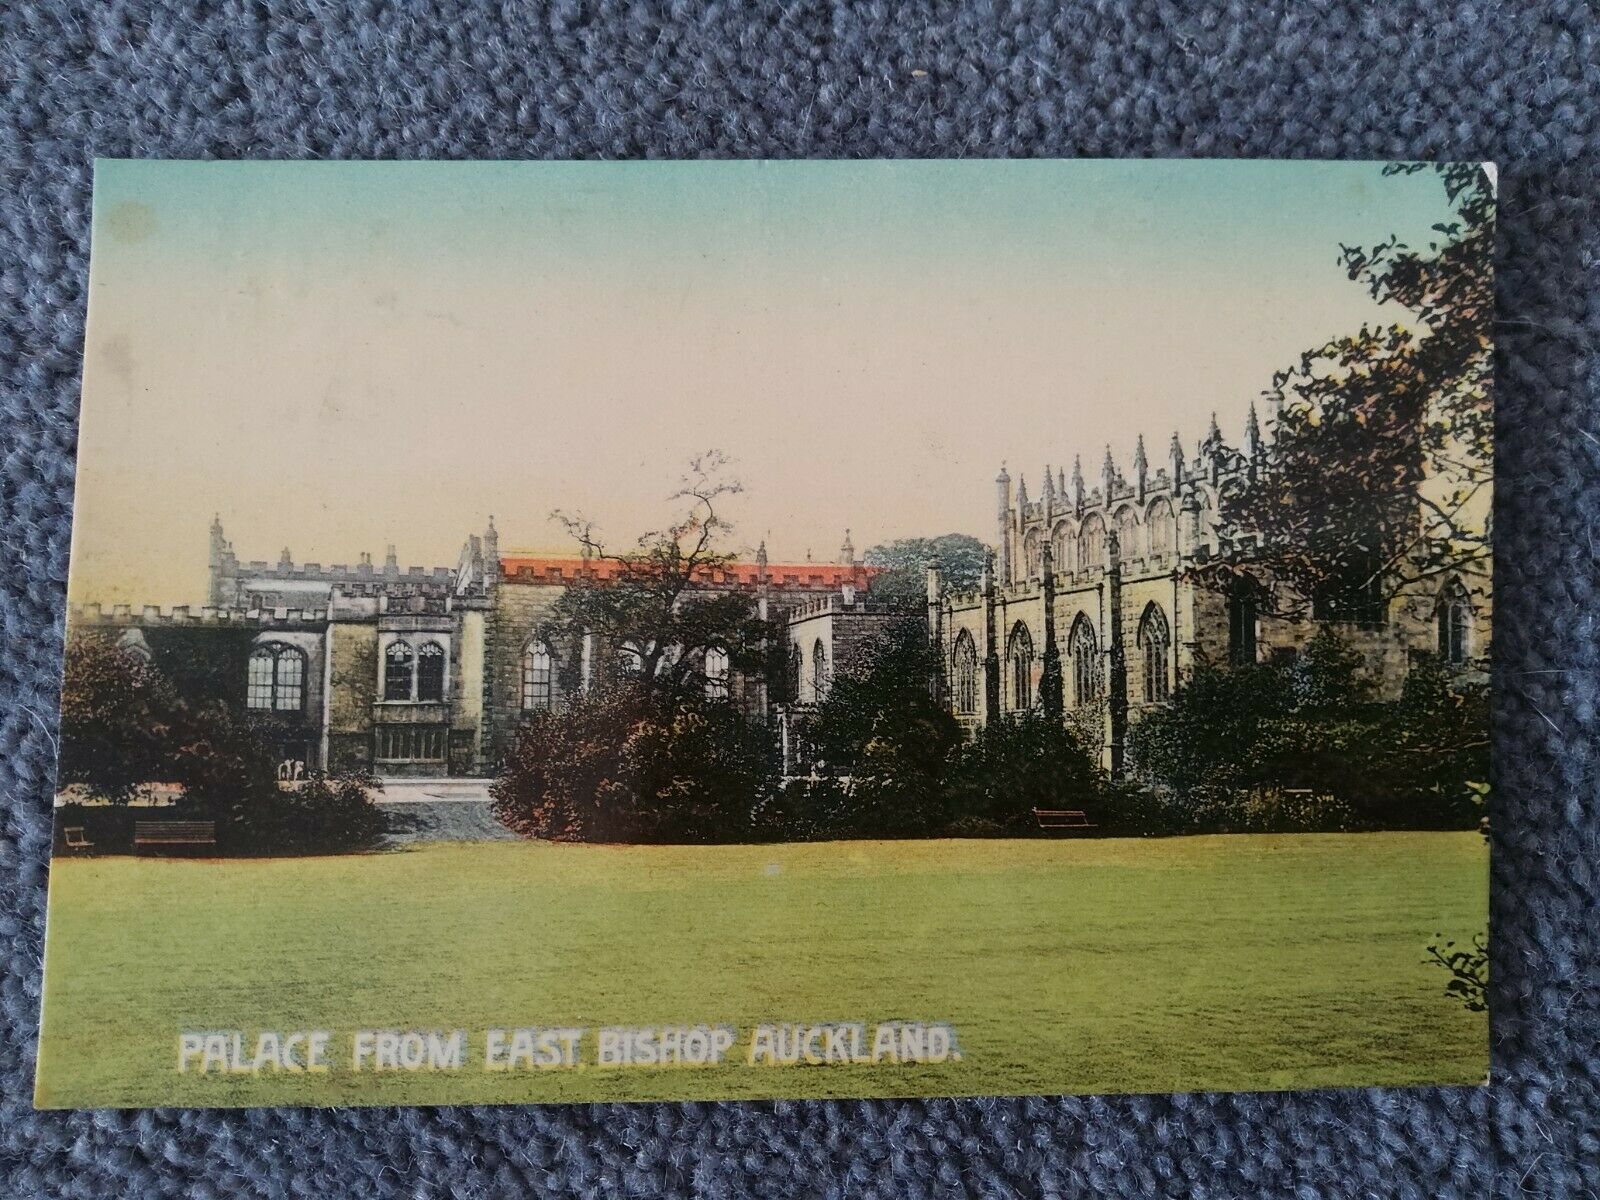 House Clearance - Palace From East, Bishop Auckland Gem Series Service, No 441